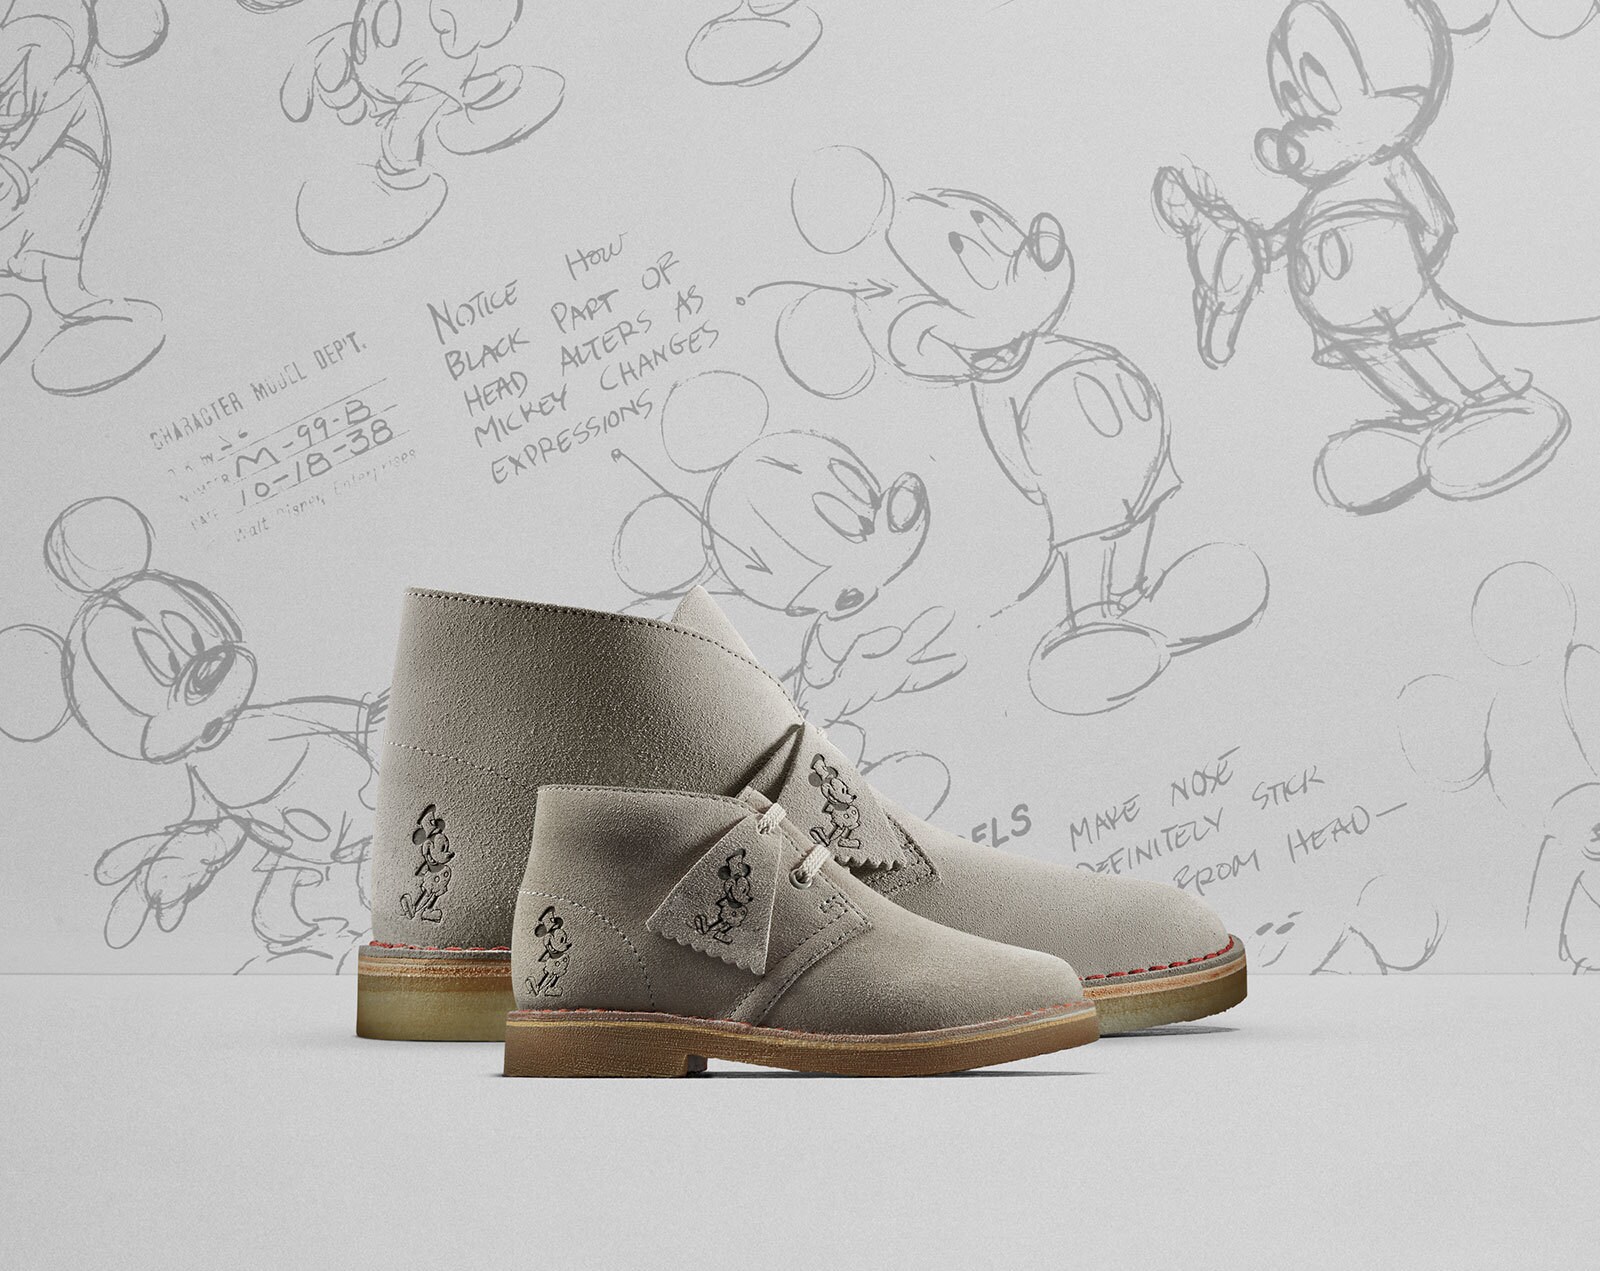 Clarks Mickey Mouse themed limited-edition Desert Boot 